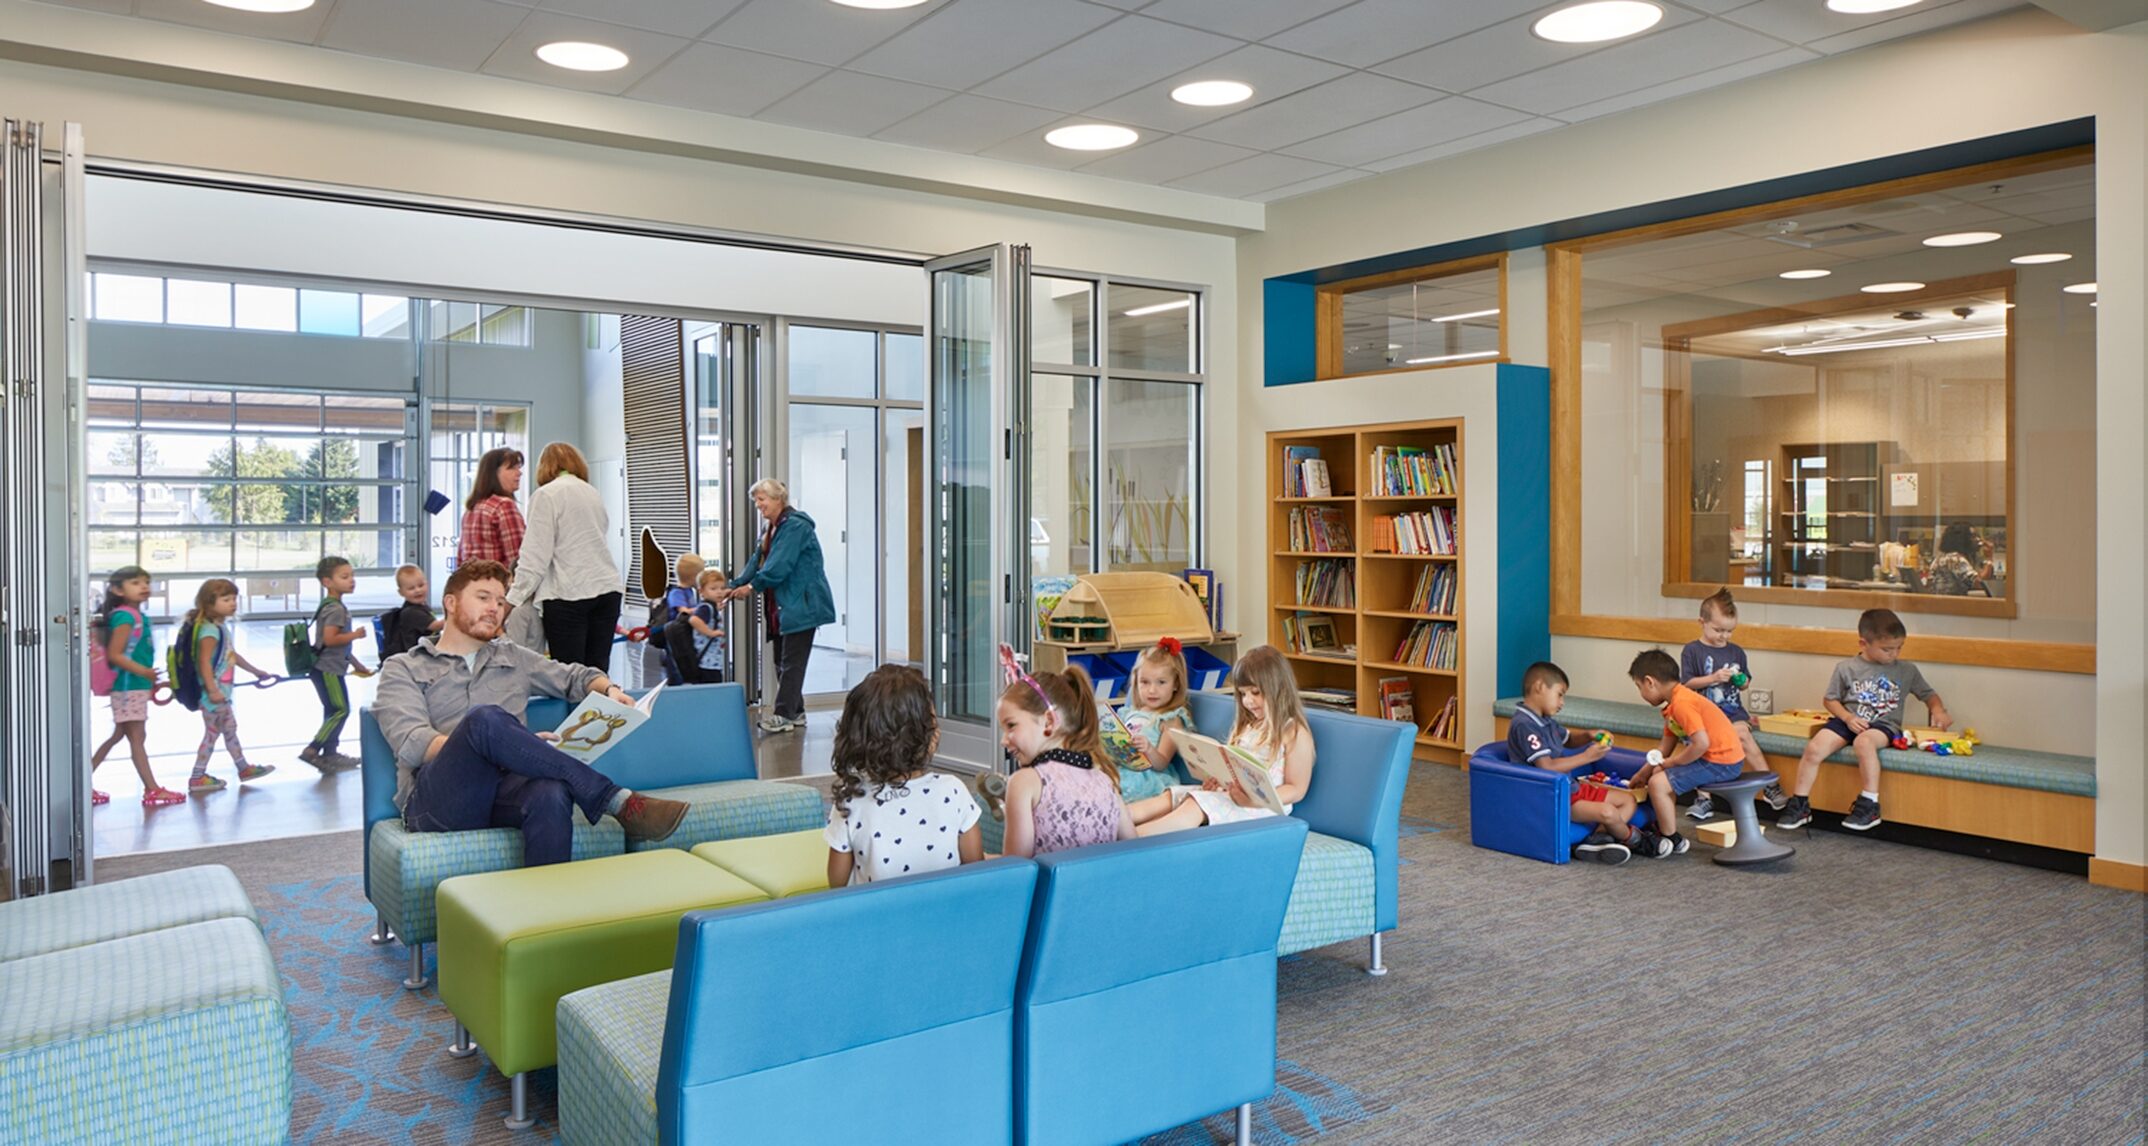 The common entry space in the Lake Stevens Early Learning Center provides a “living room” where students and their families can connect with their school community.